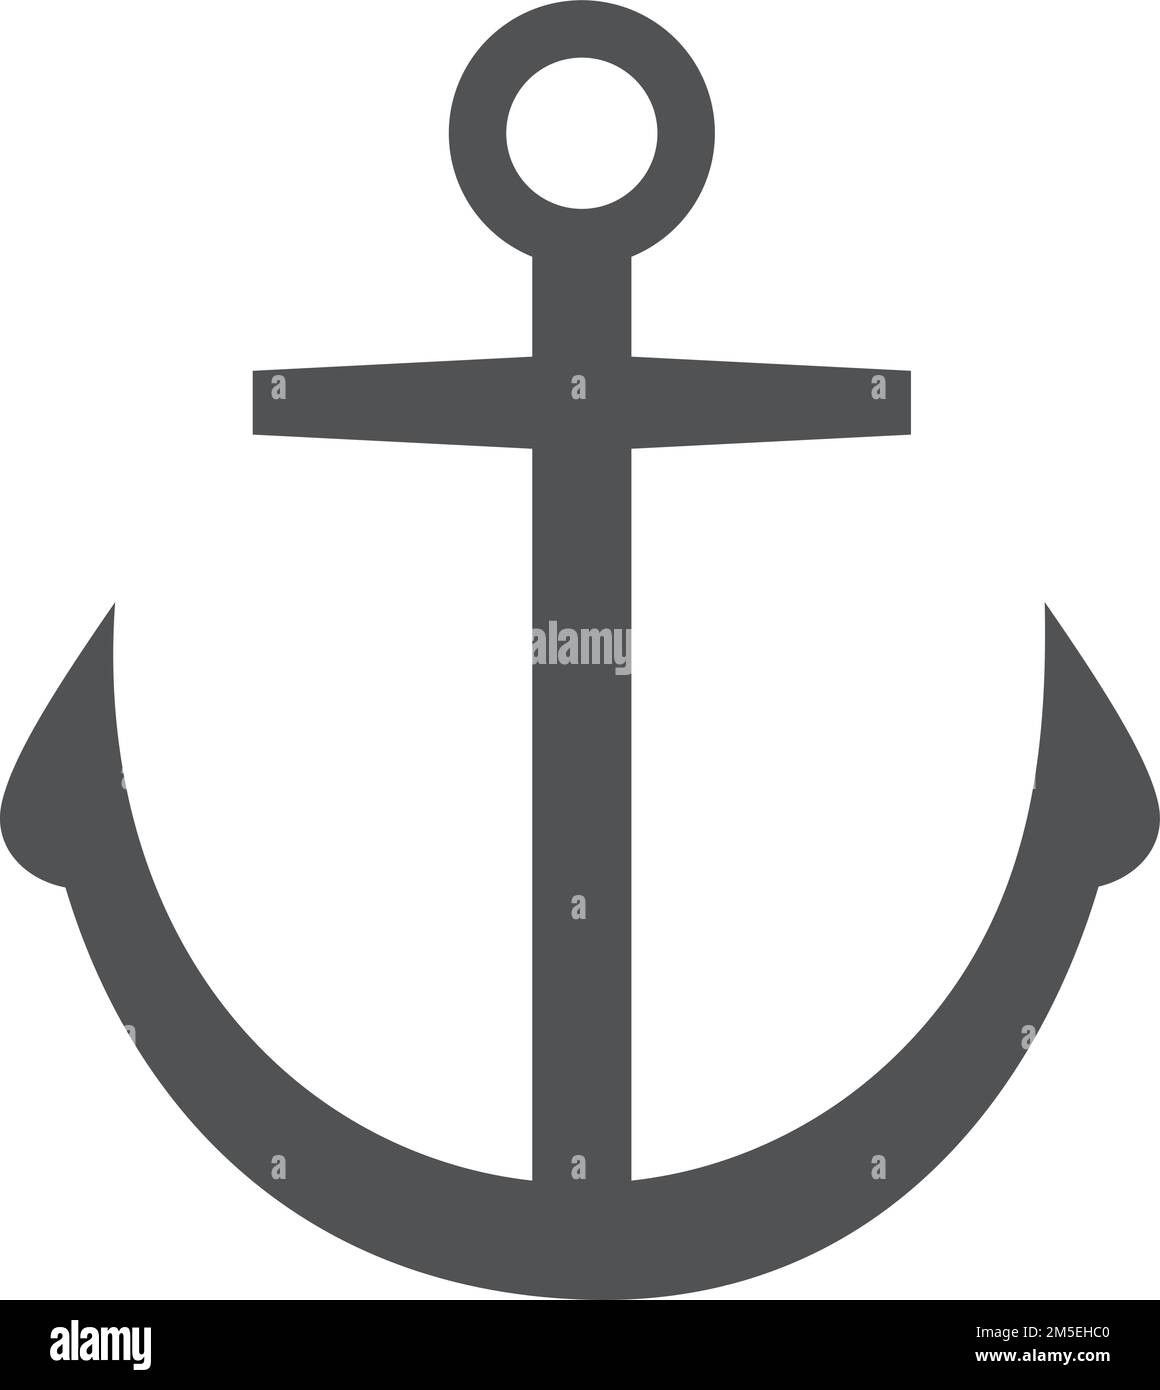 Anchor icon. Navy symbol. Boat safety tool Stock Vector